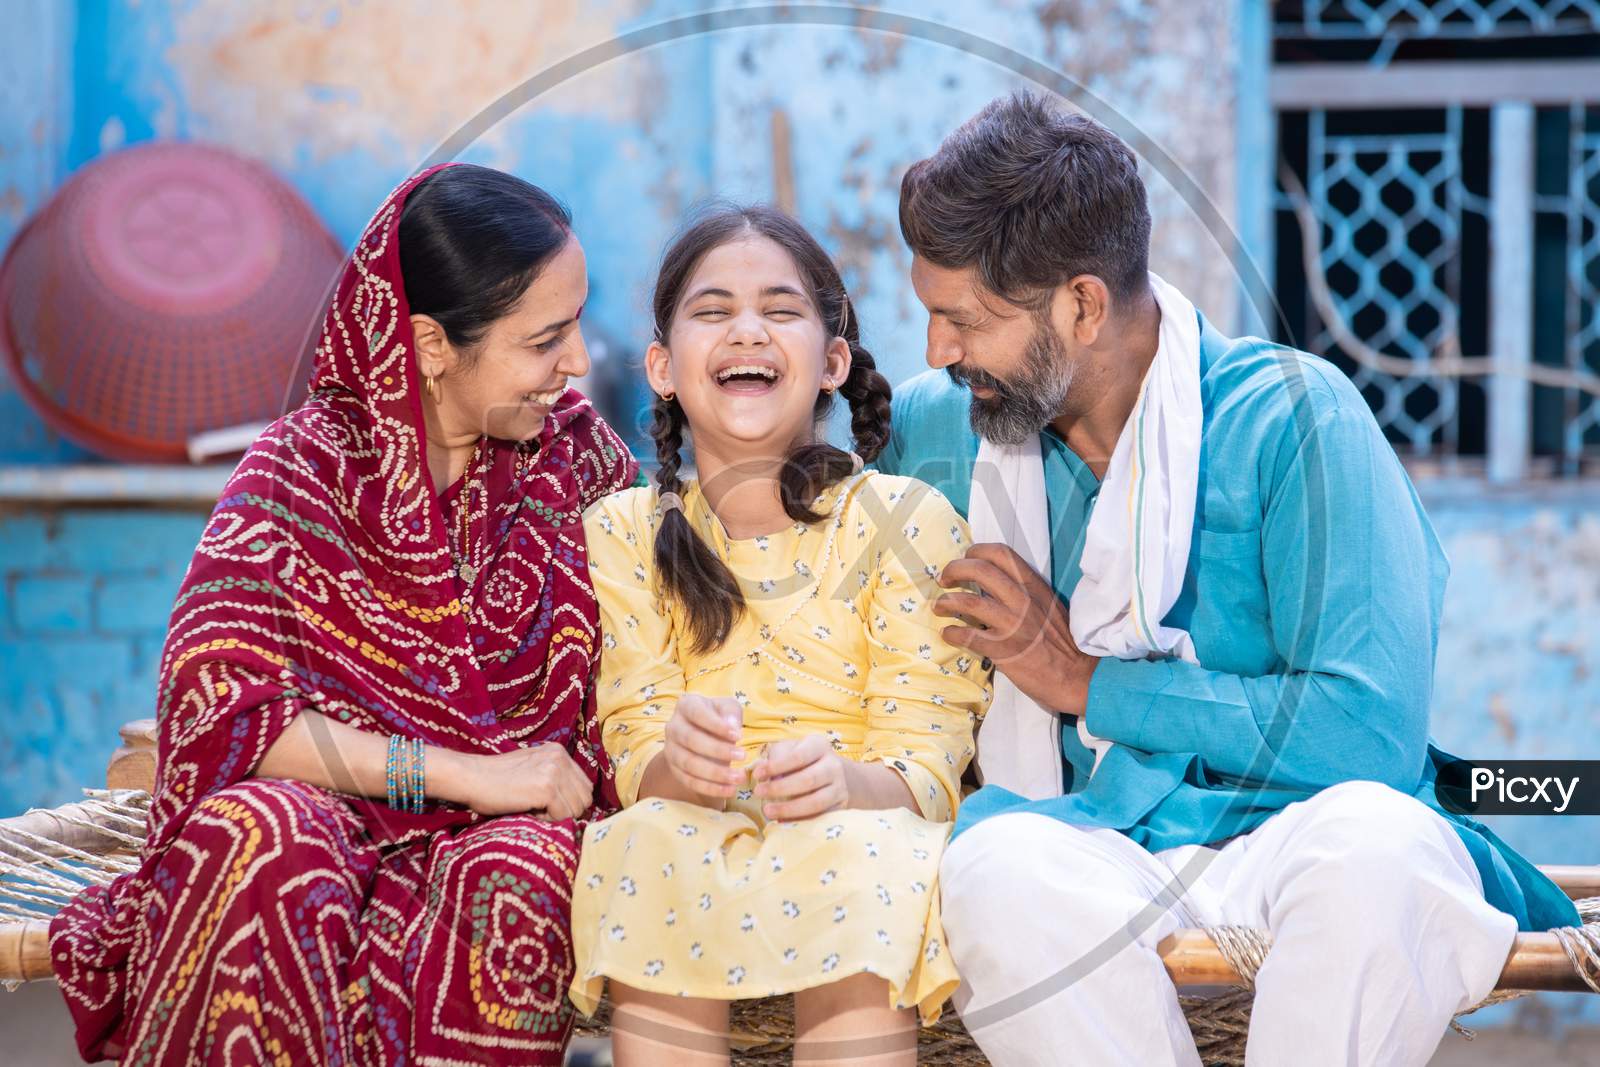 Portrait Of Happy Rural Indian Family Laughing And Having A Good Time Together While Sitting Outside At Village House, Cheerful Little Daughter Enjoy With Her Father And Mother.Parent With Child